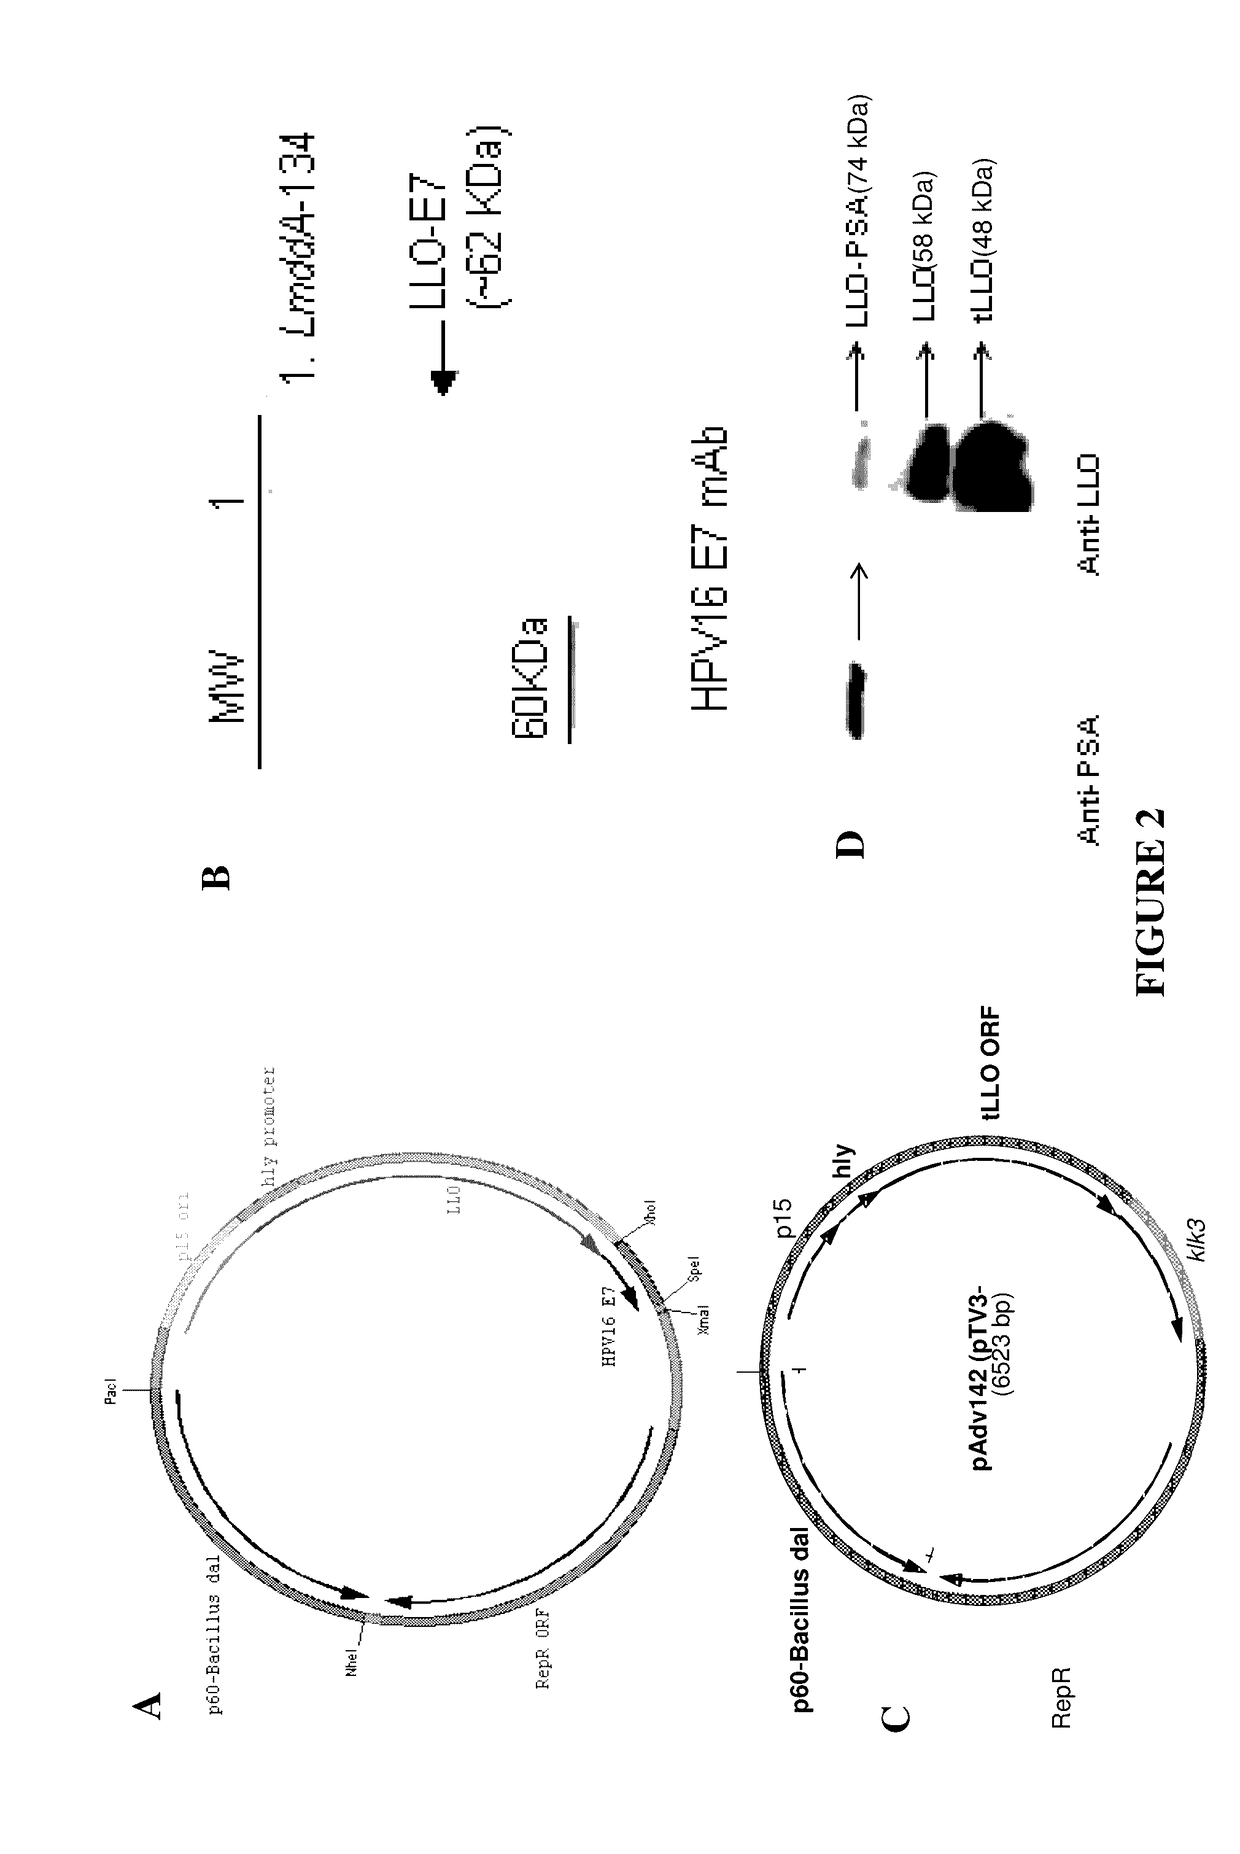 Dual delivery system for heterologous antigens